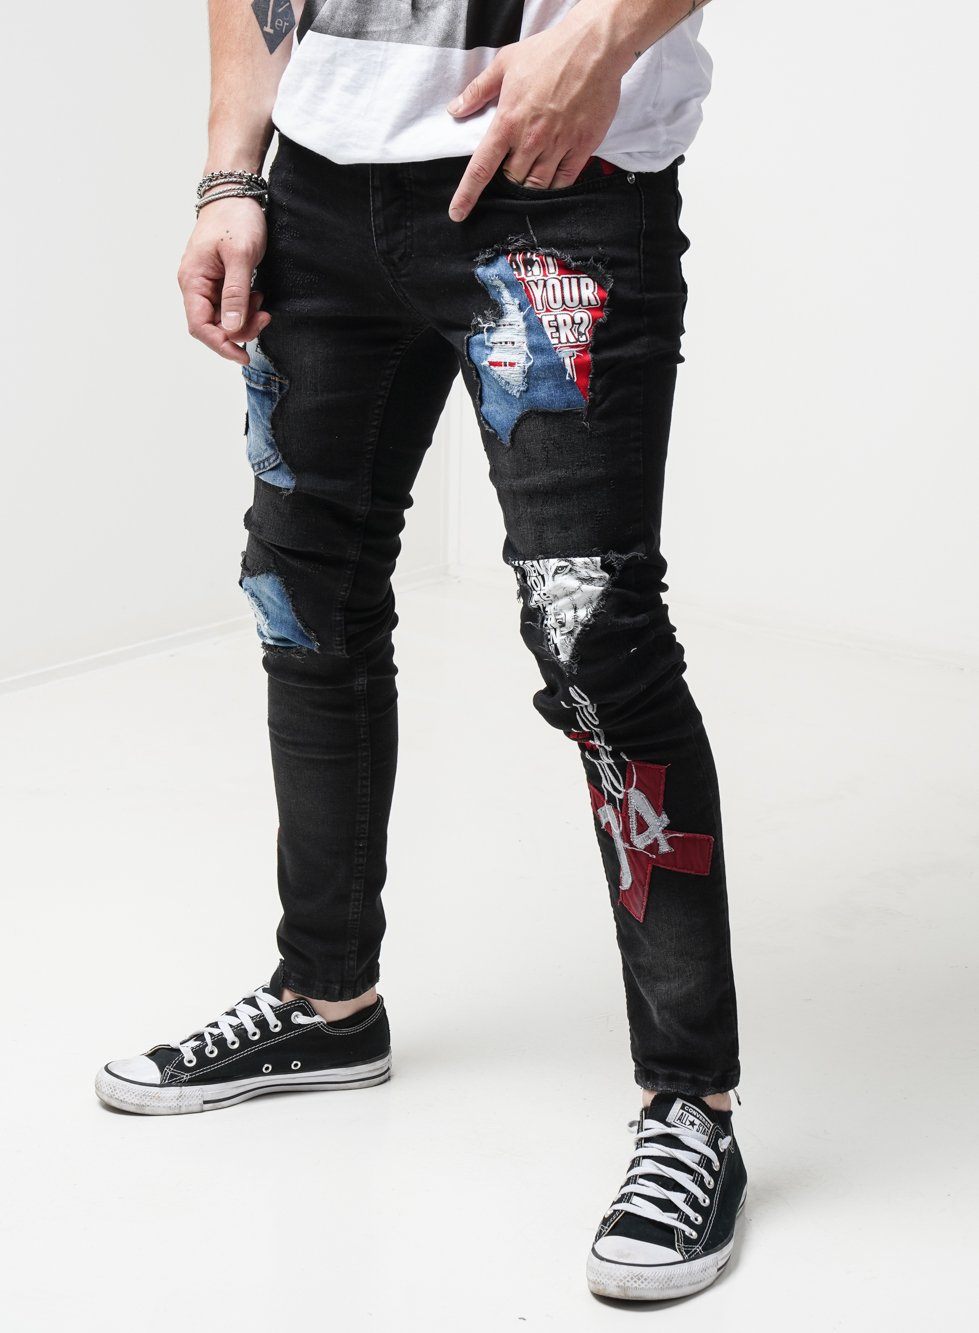 A man wearing a pair of INSIDER jeans with patches, showcasing mens streetwear.